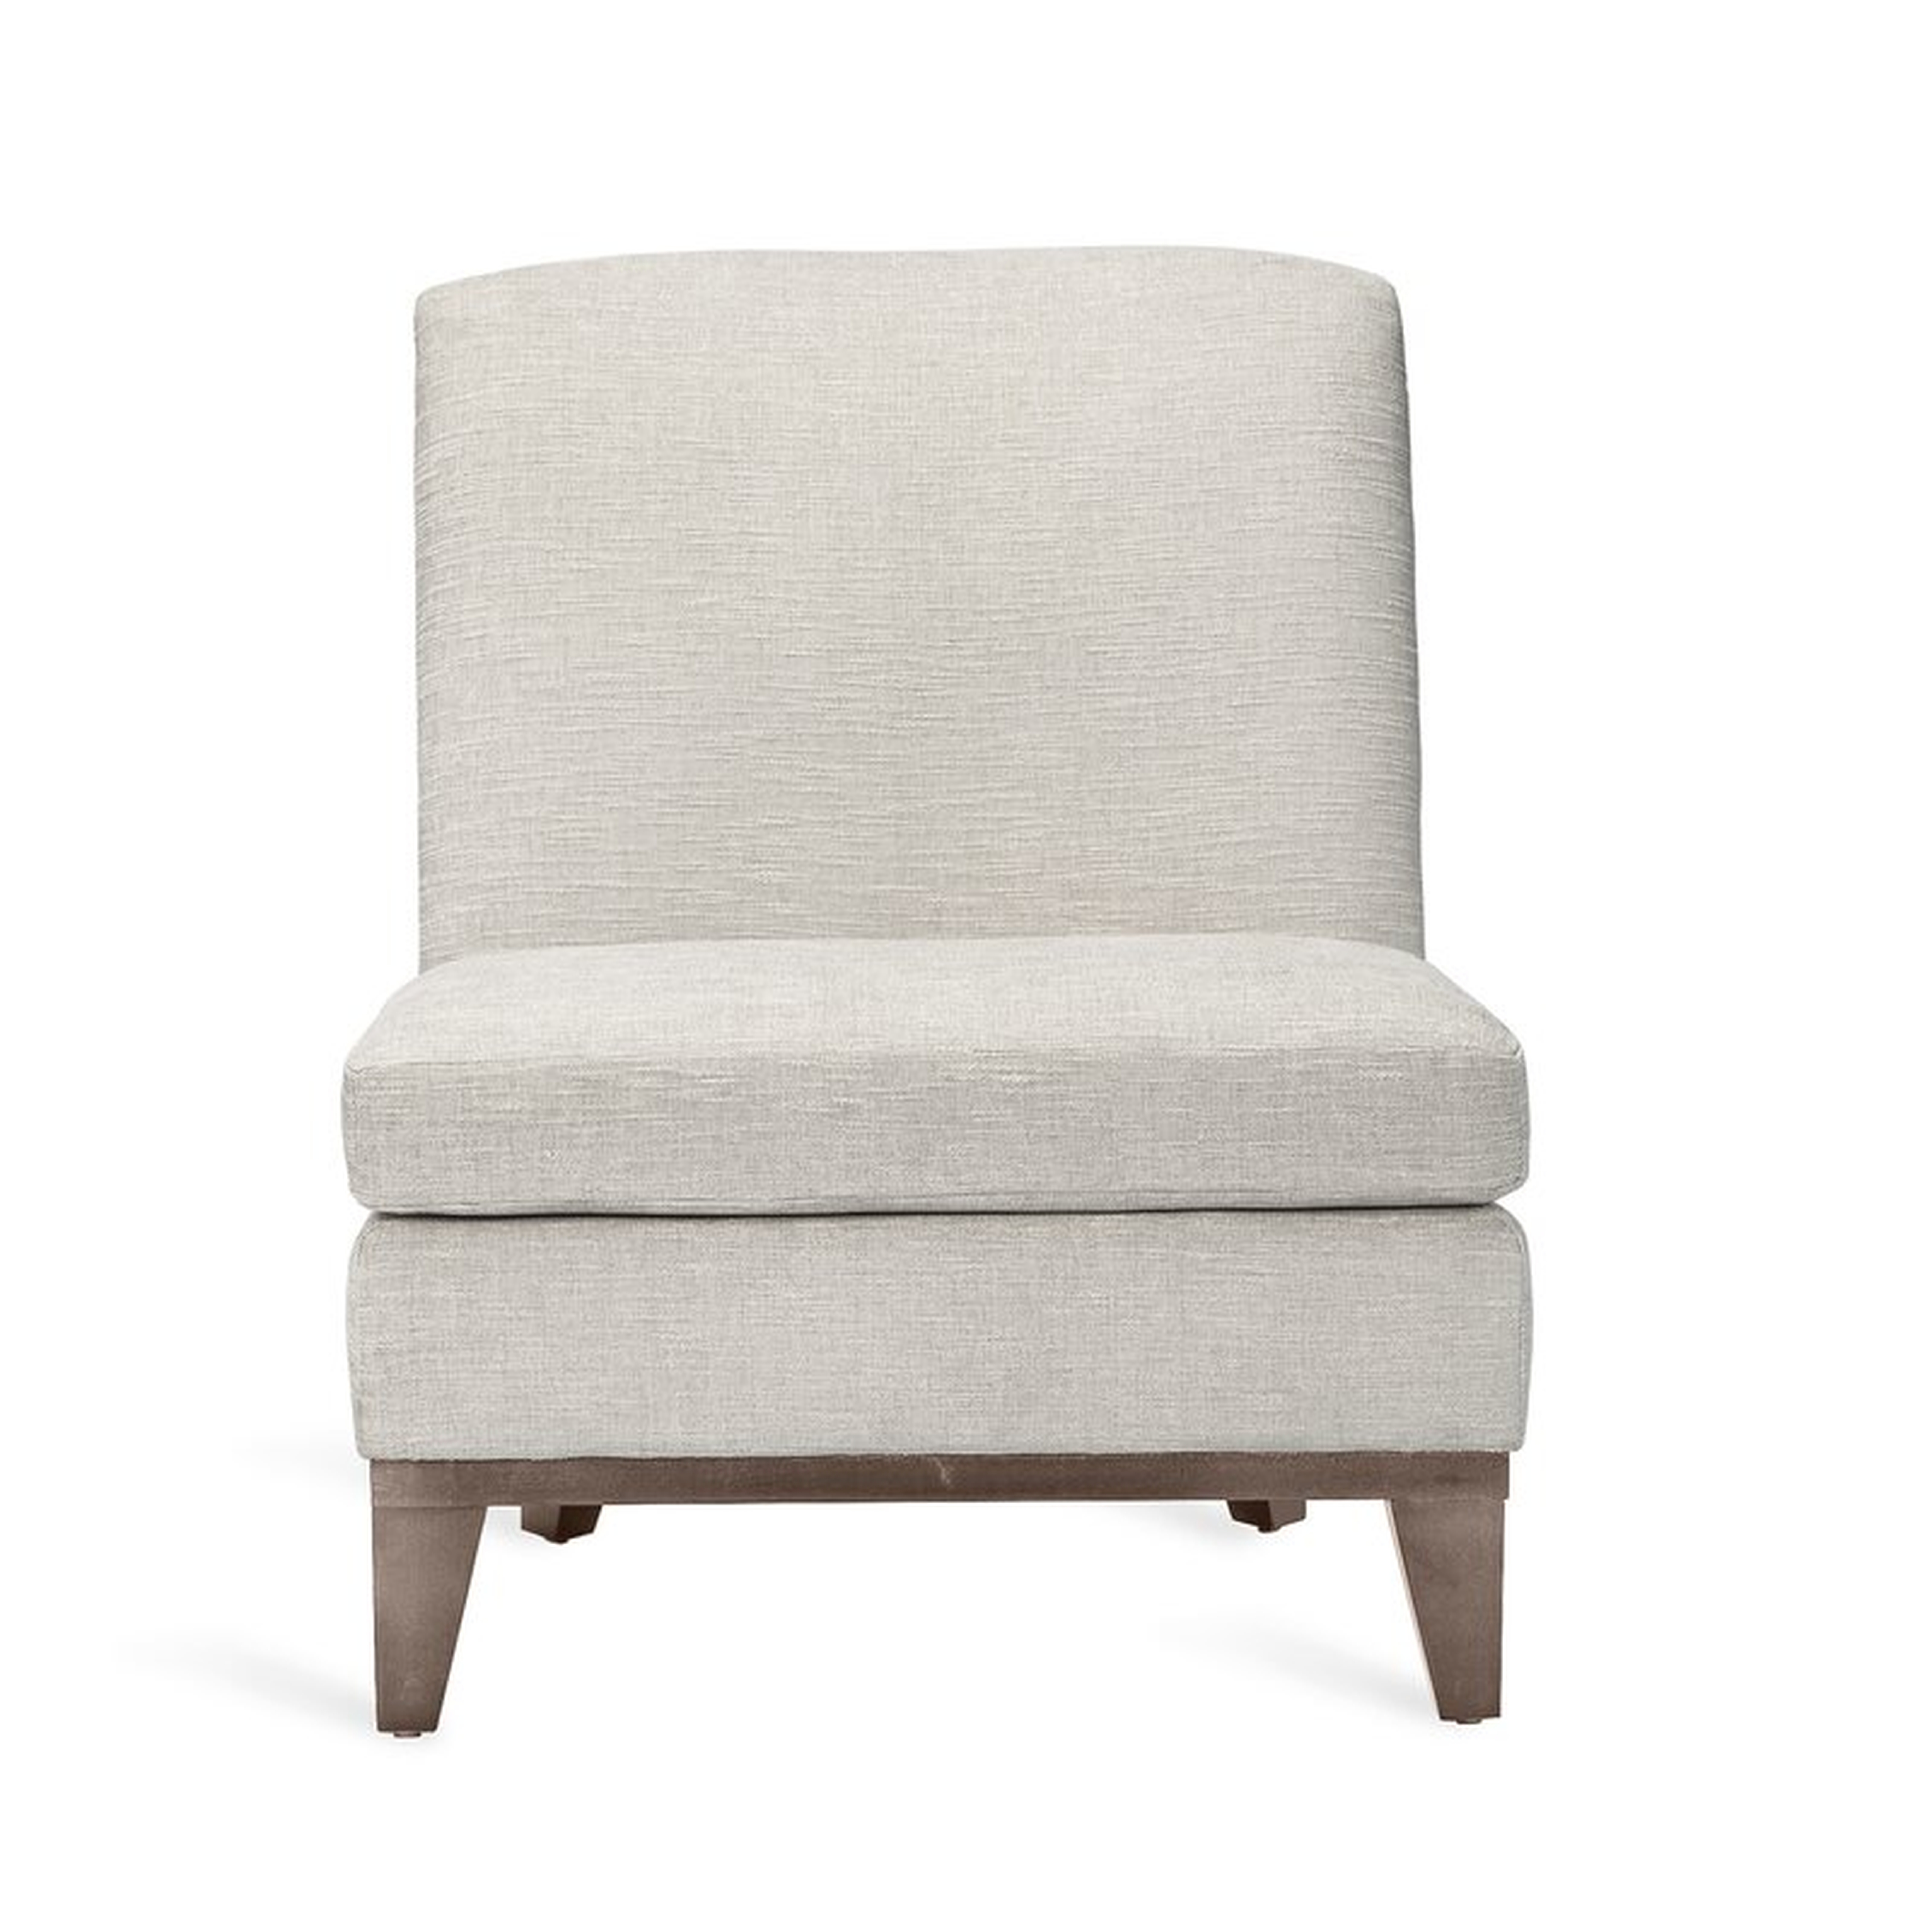 Interlude Belinda Lounge Chair Upholstery Color: Pearl - Perigold